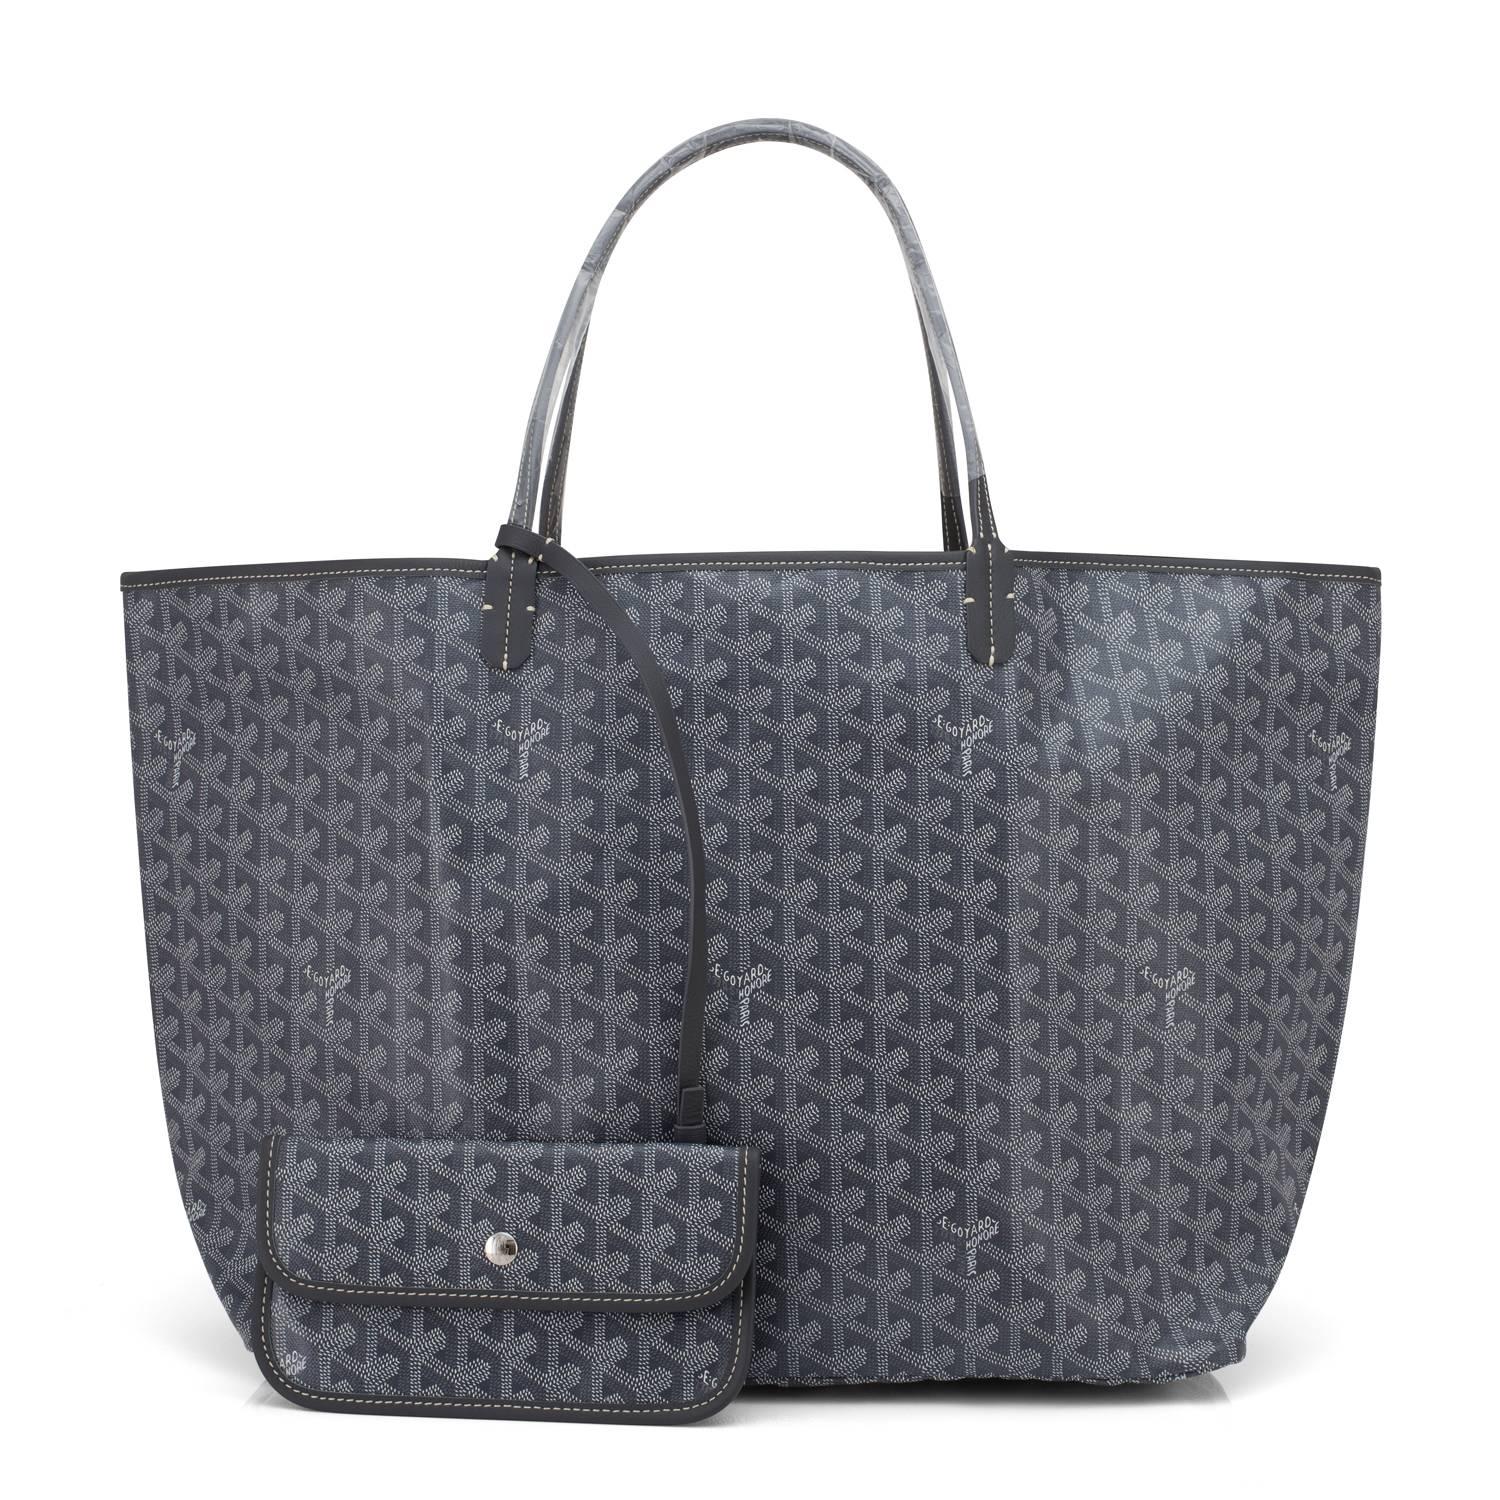 Goyard St Louis GM Grey Chevron Tote Bag Chic
Brand New.  Store Fresh.  Pristine Condition (with plastic on handles)
Perfect gift!  Comes with yellow Goyard sleeper and inner organizational pochette.
This is the cult-favorite Goyard Chevron Tote in